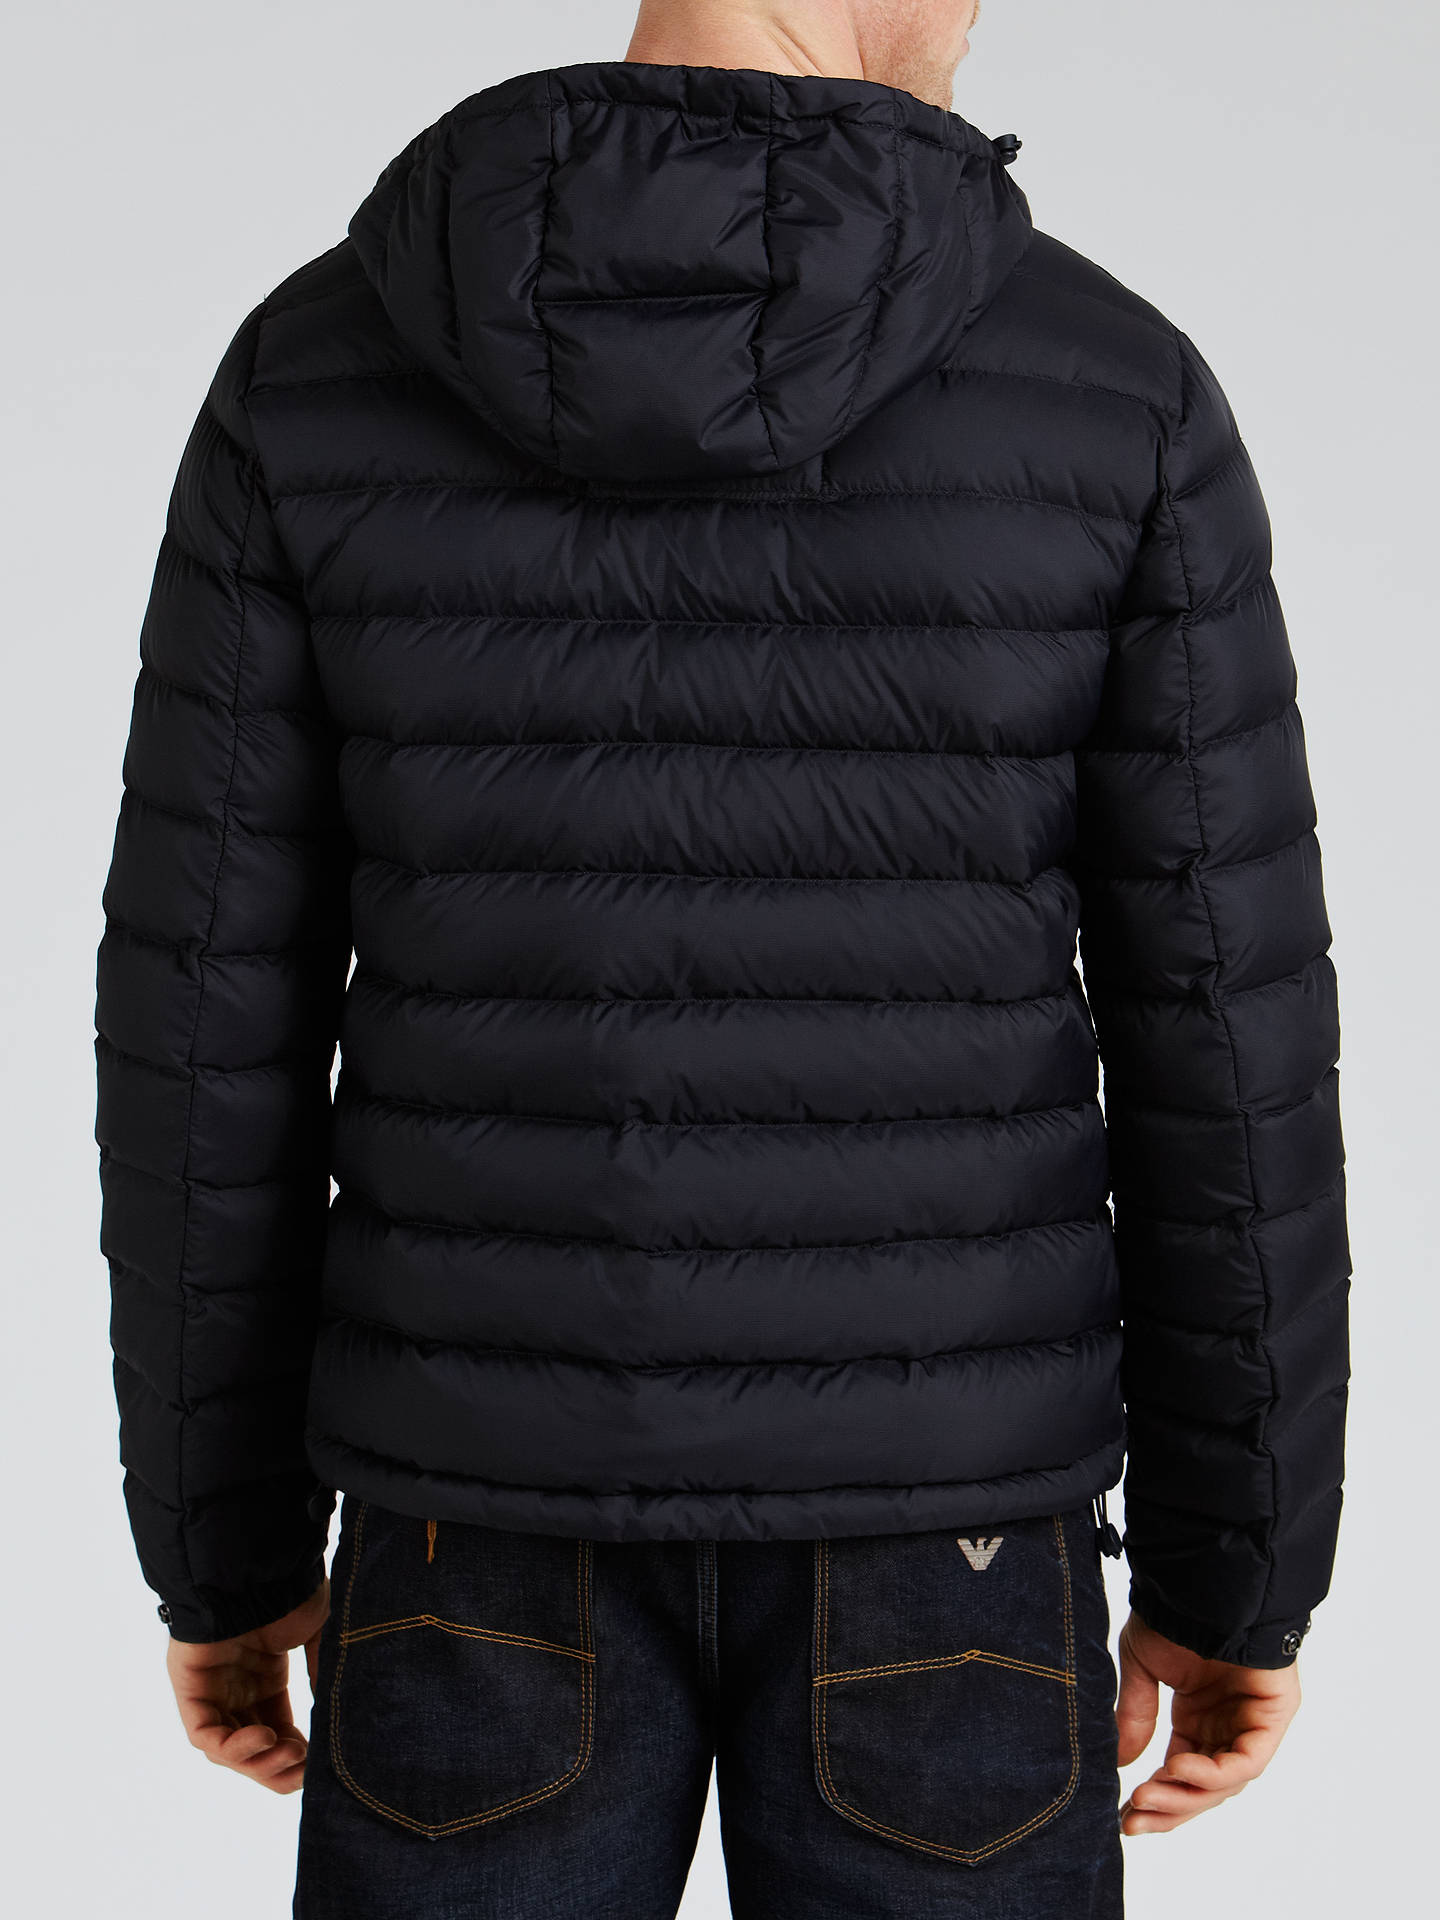 Armani Jeans Down Filled Puffer Jacket, Navy at John Lewis & Partners